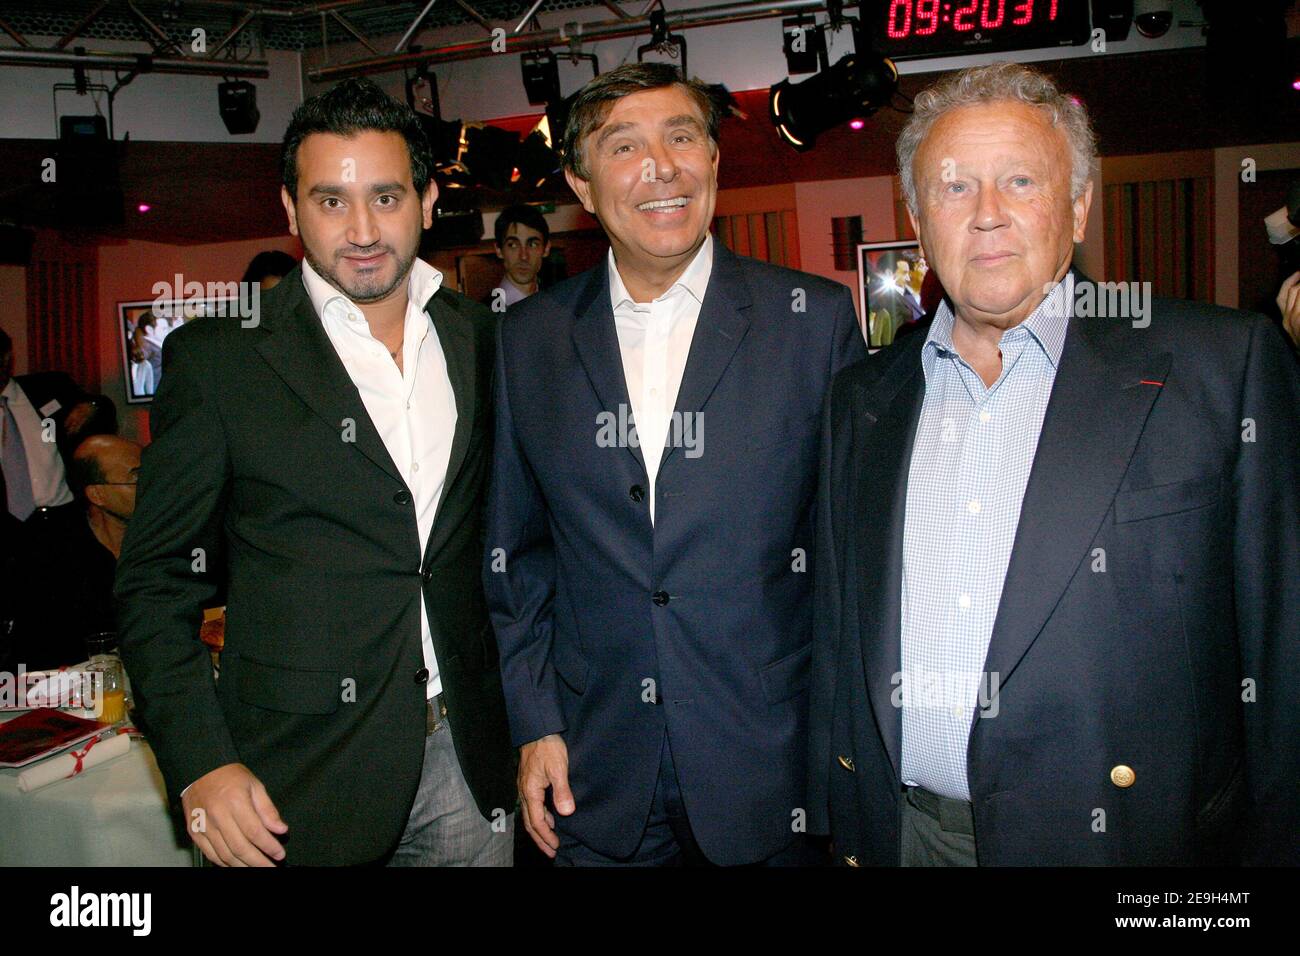 Cyril Hanouna, Jean-Pierre Foucault and Philippe Bouvard pose during the  annual press conference of French radio station RTL , rue Bayard in Paris,  France on August 29, 2006. Photo by Mehdi Taamallah/ABACAPRESS.COM